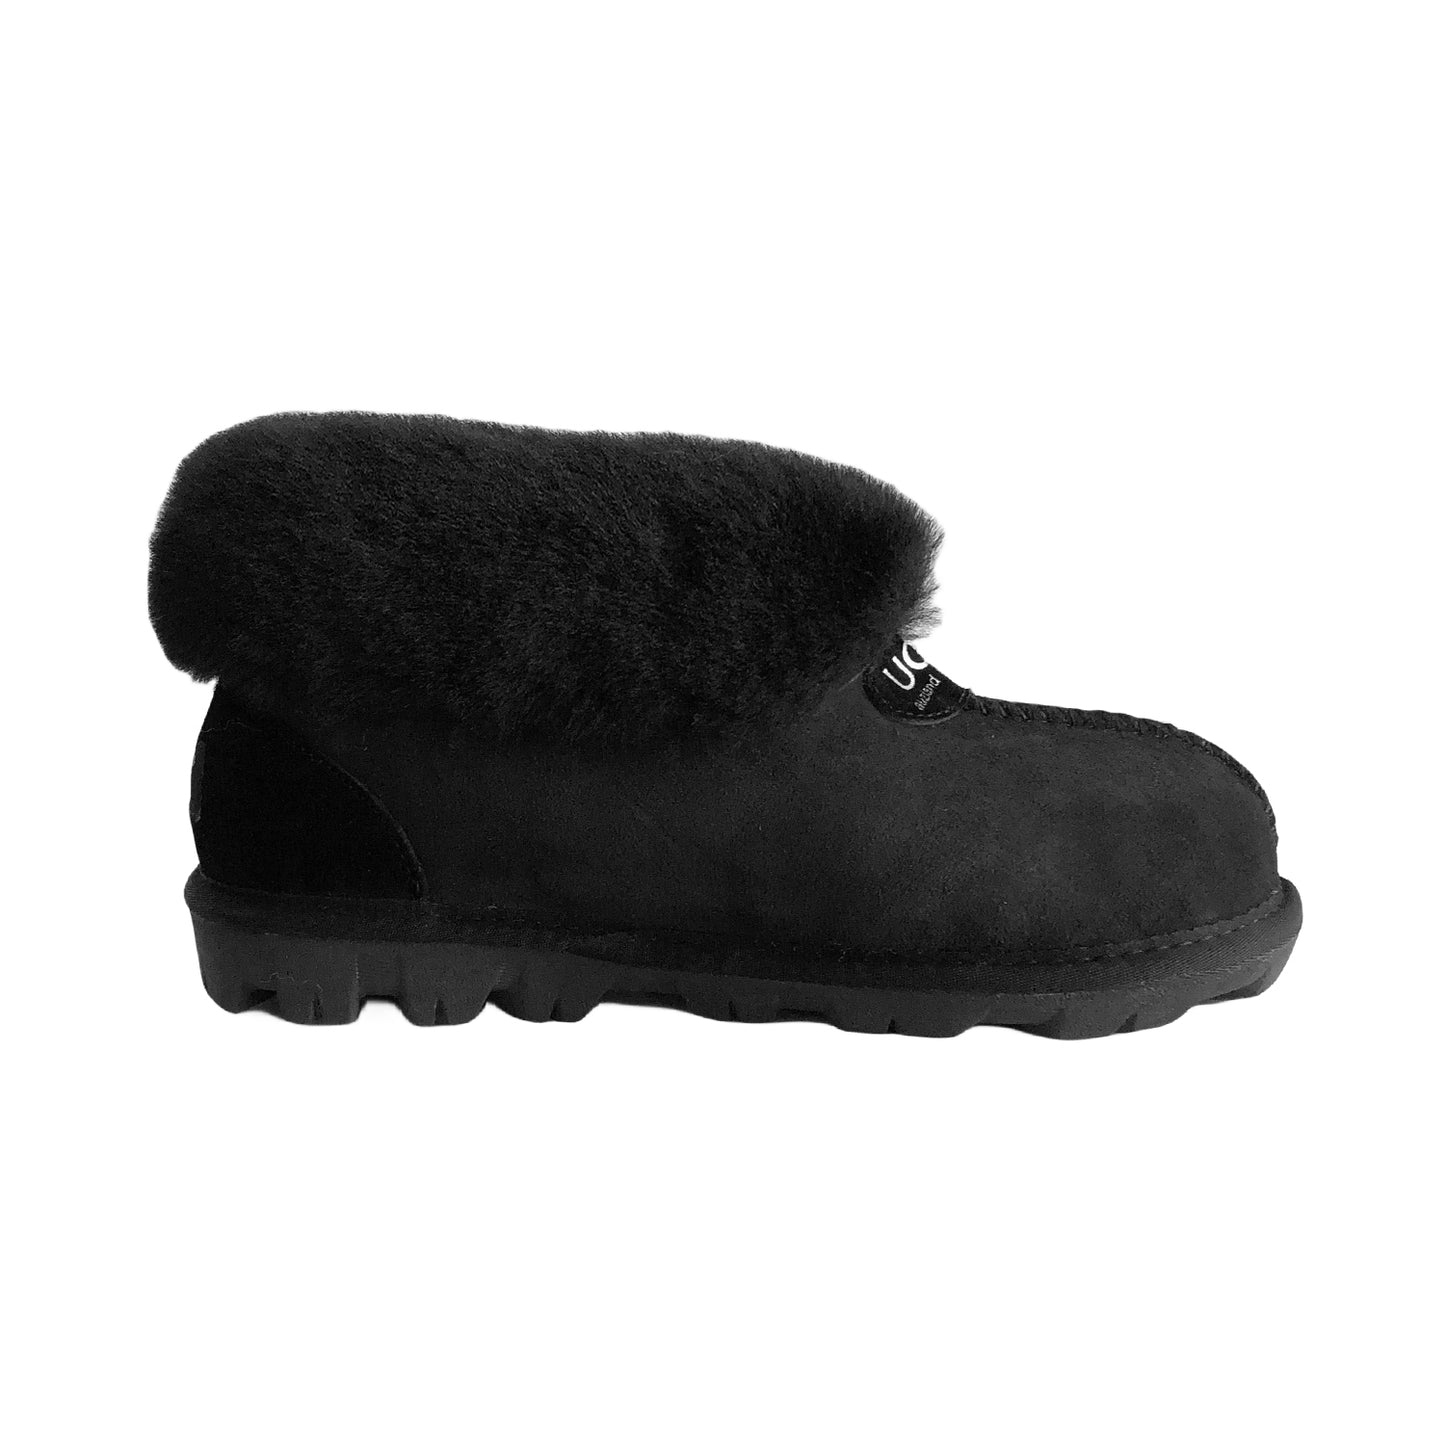 UGG Ace Slippers